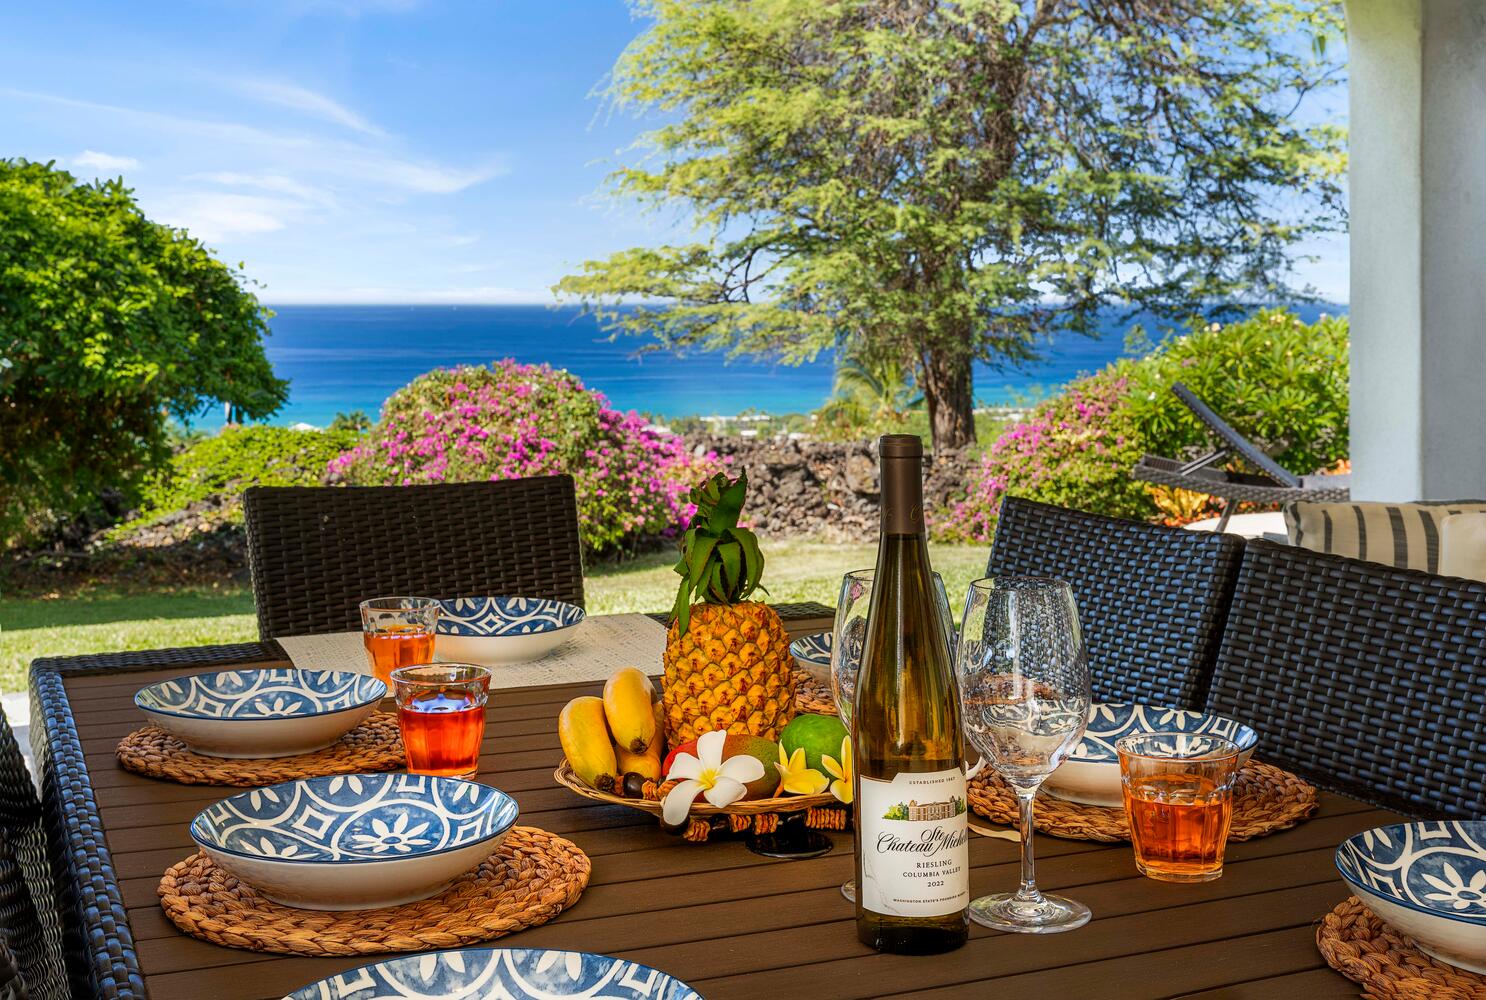 Kailua Kona Vacation Rentals, Ho'okipa Hale - Sumptuous tropical meals paired with lasting memories await.